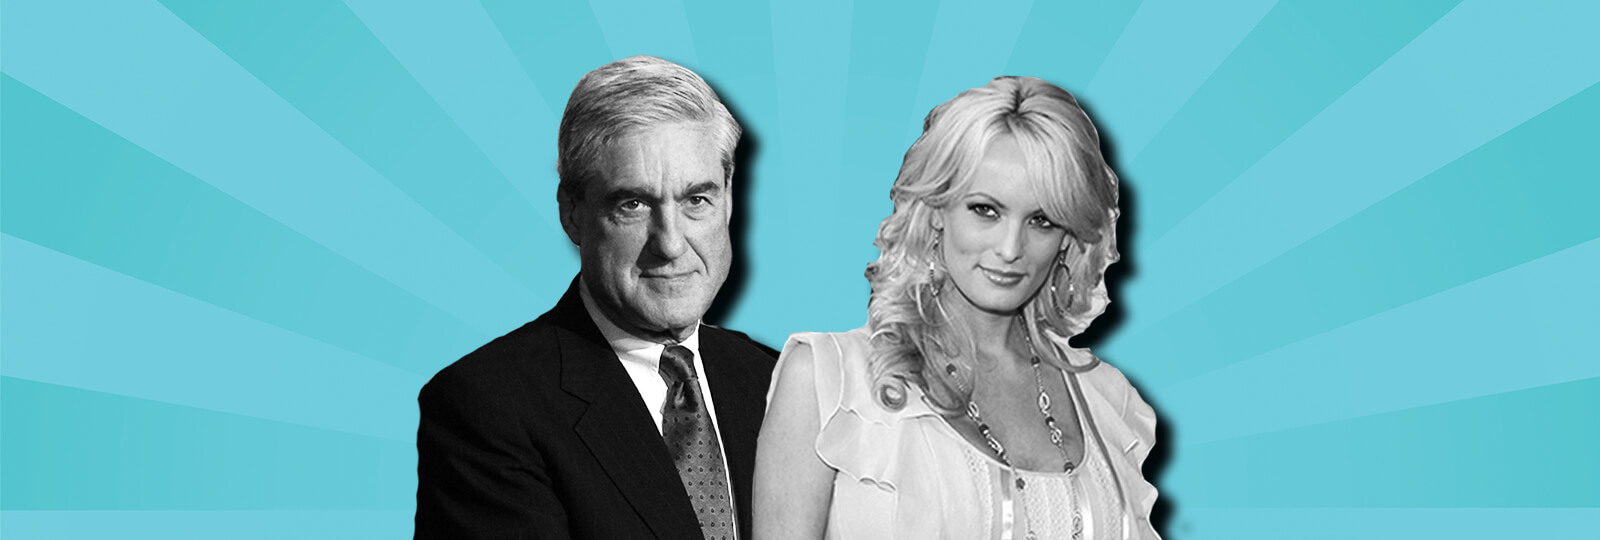 A collage of photos of Robert Mueller and Stormy Daniels